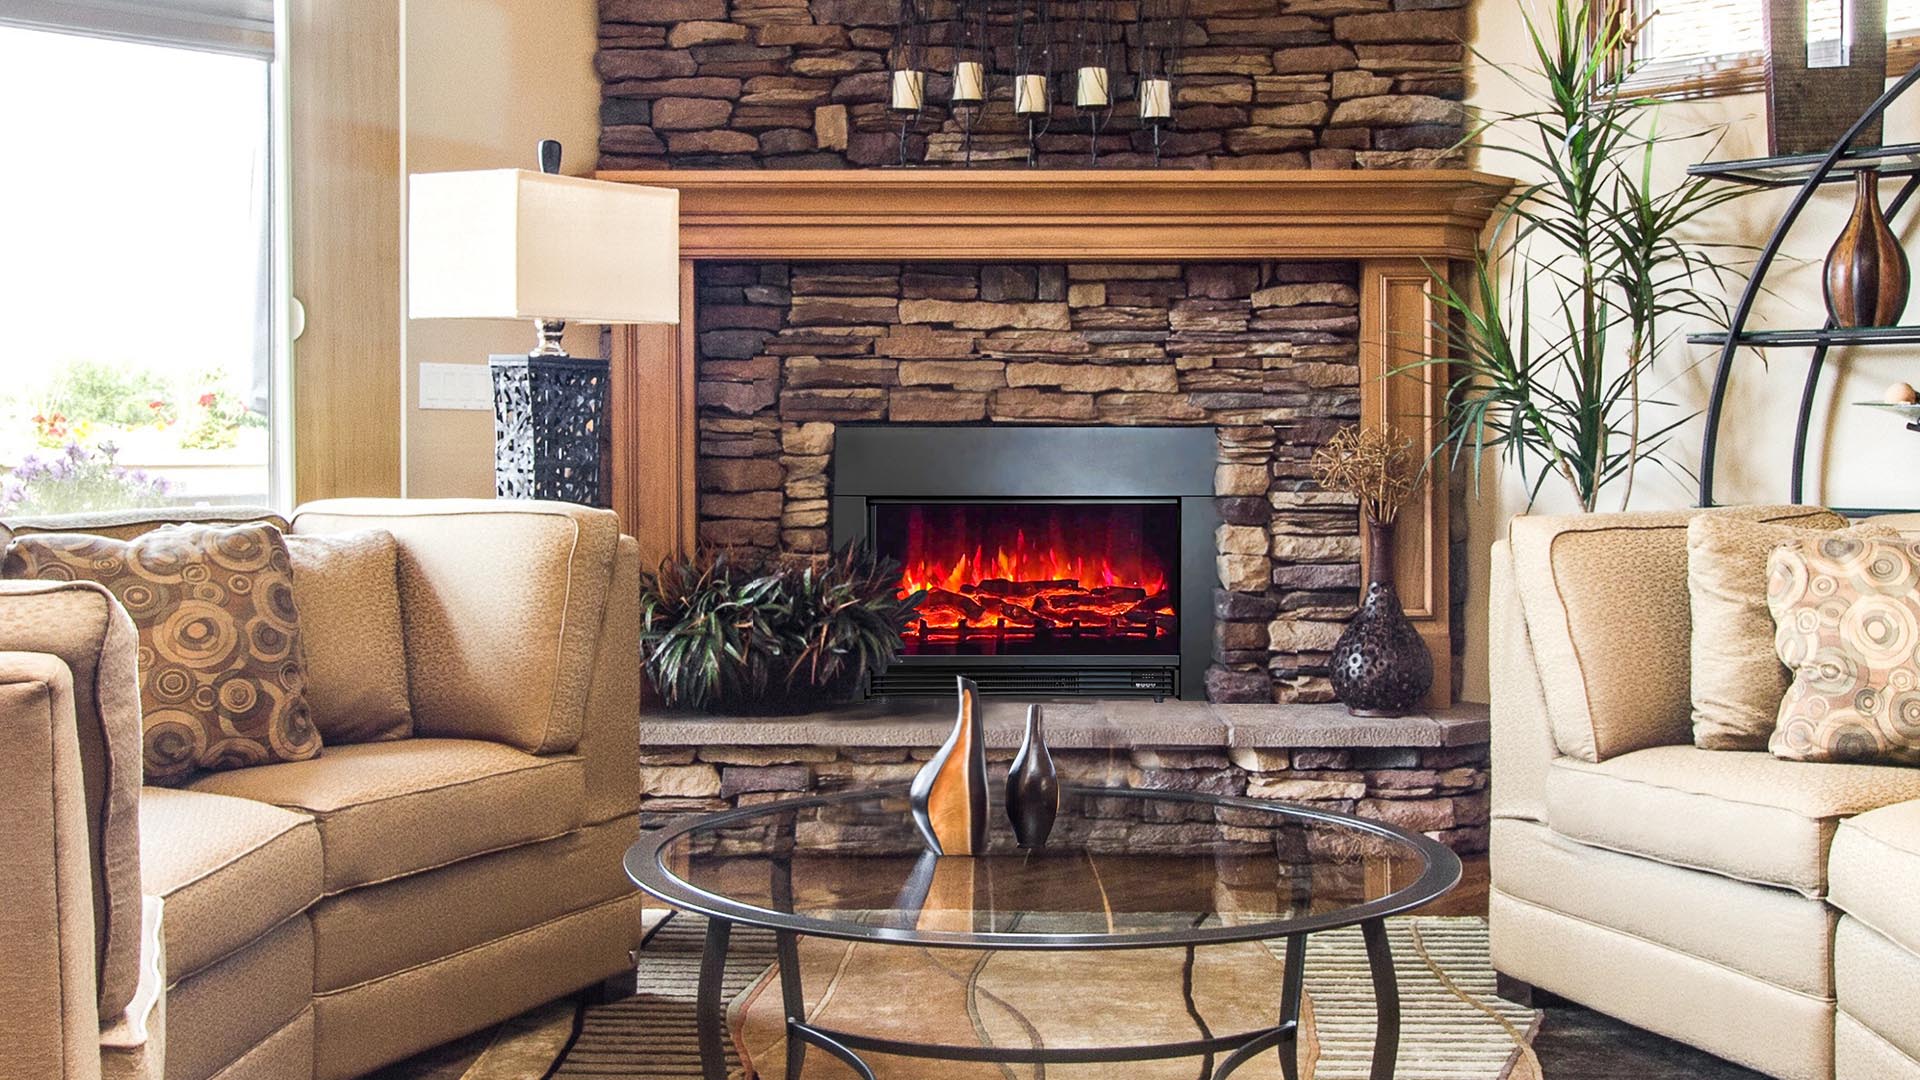 Load video: Zopaflame 38inch Electric fireplace insert -traditional style